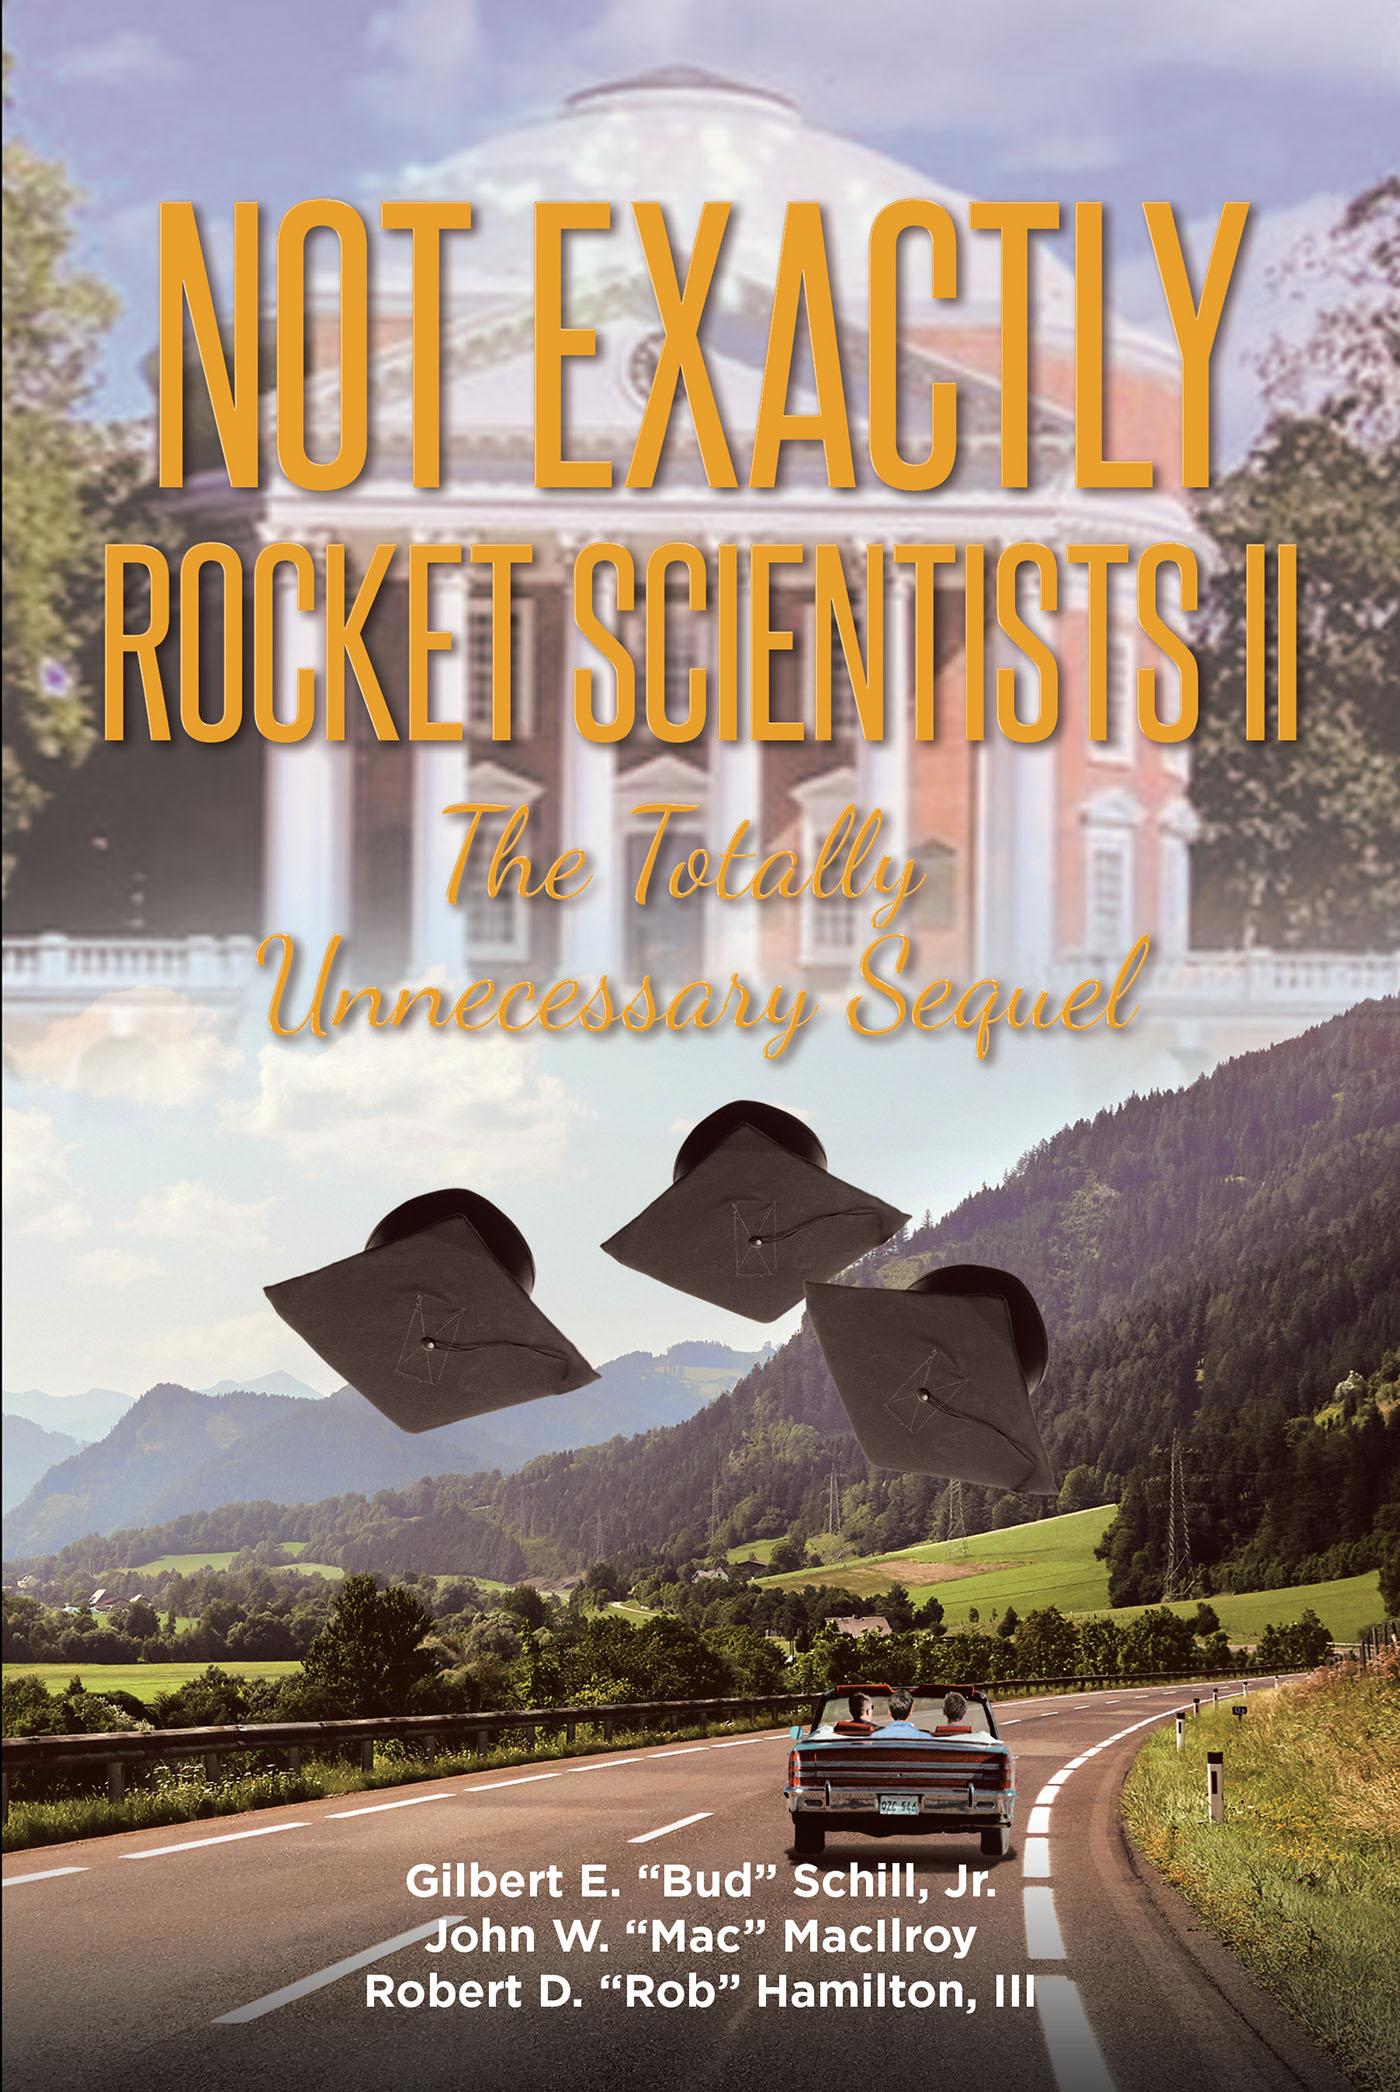 Authors Gilbert E. Schill, Jr., John W. MacIlroy, and Robert D. Hamilton, III’s New Book, “Not Exactly Rocket Scientists II: The Totally Unnecessary Sequel,” is Released